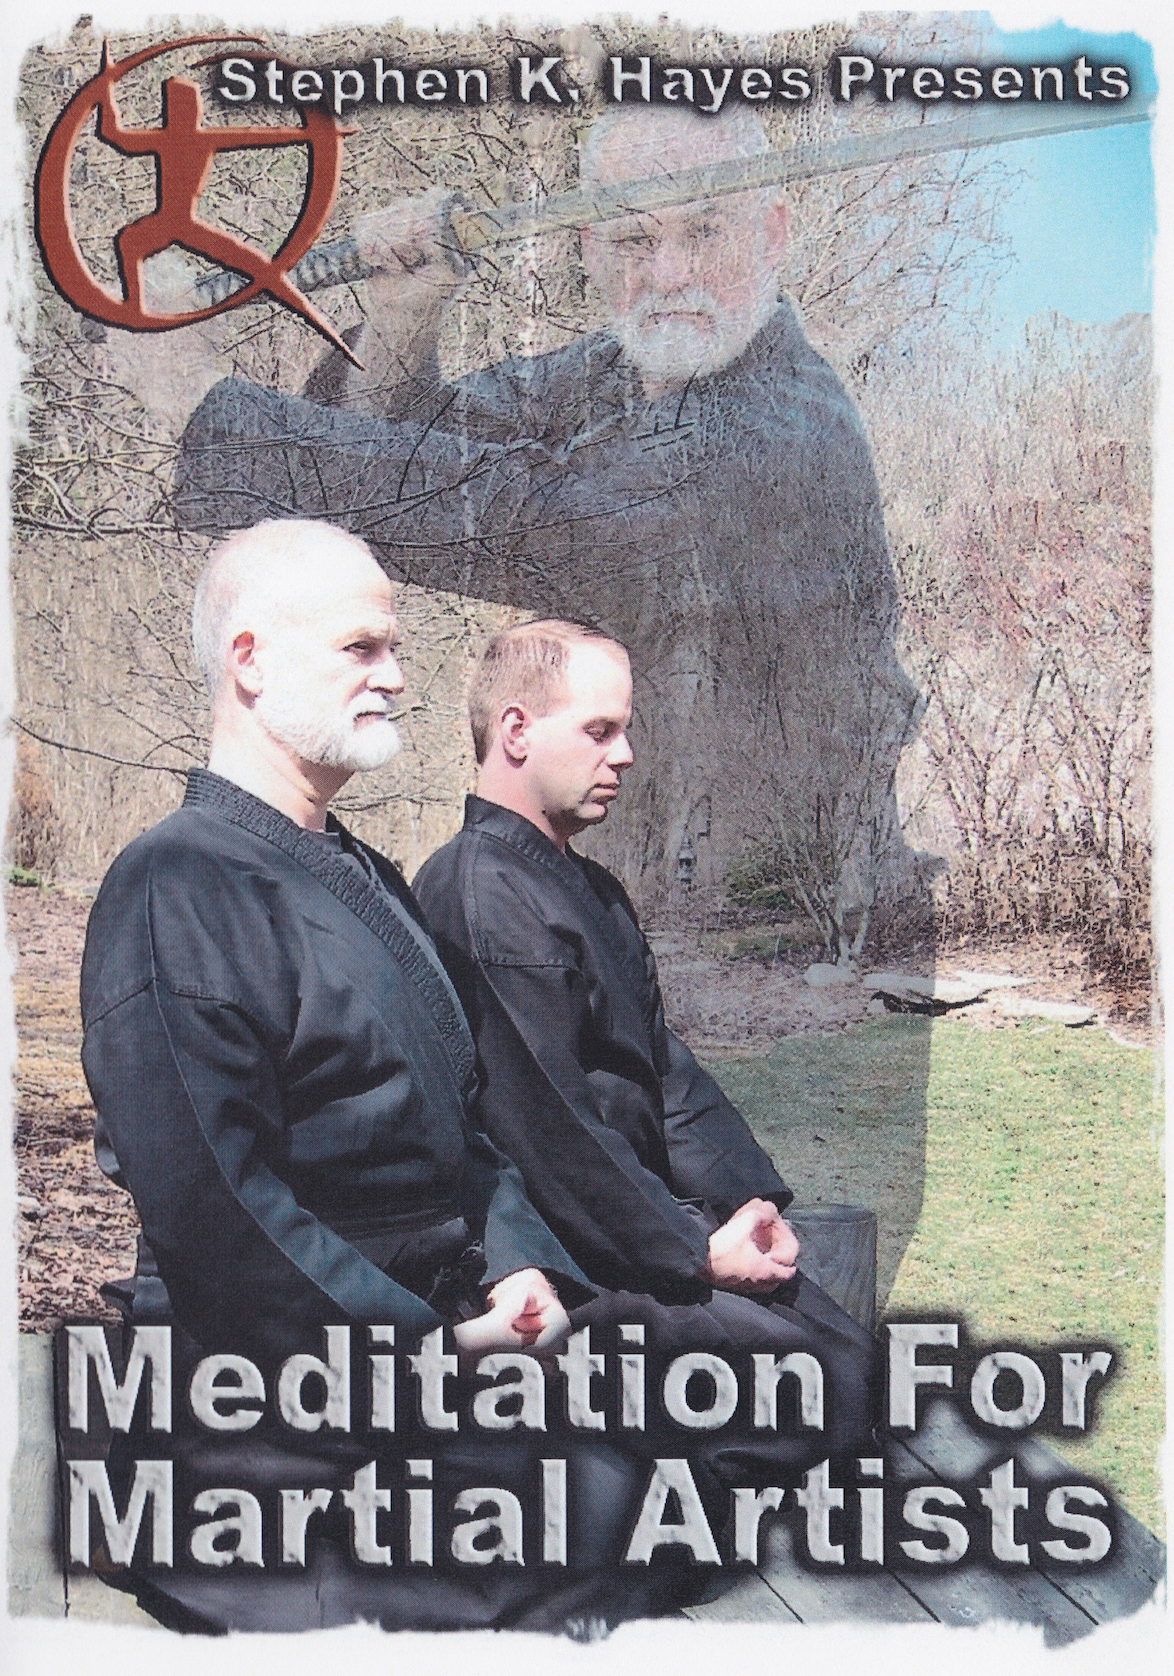 Meditation for Martial Artists DVD with Stephen Hayes